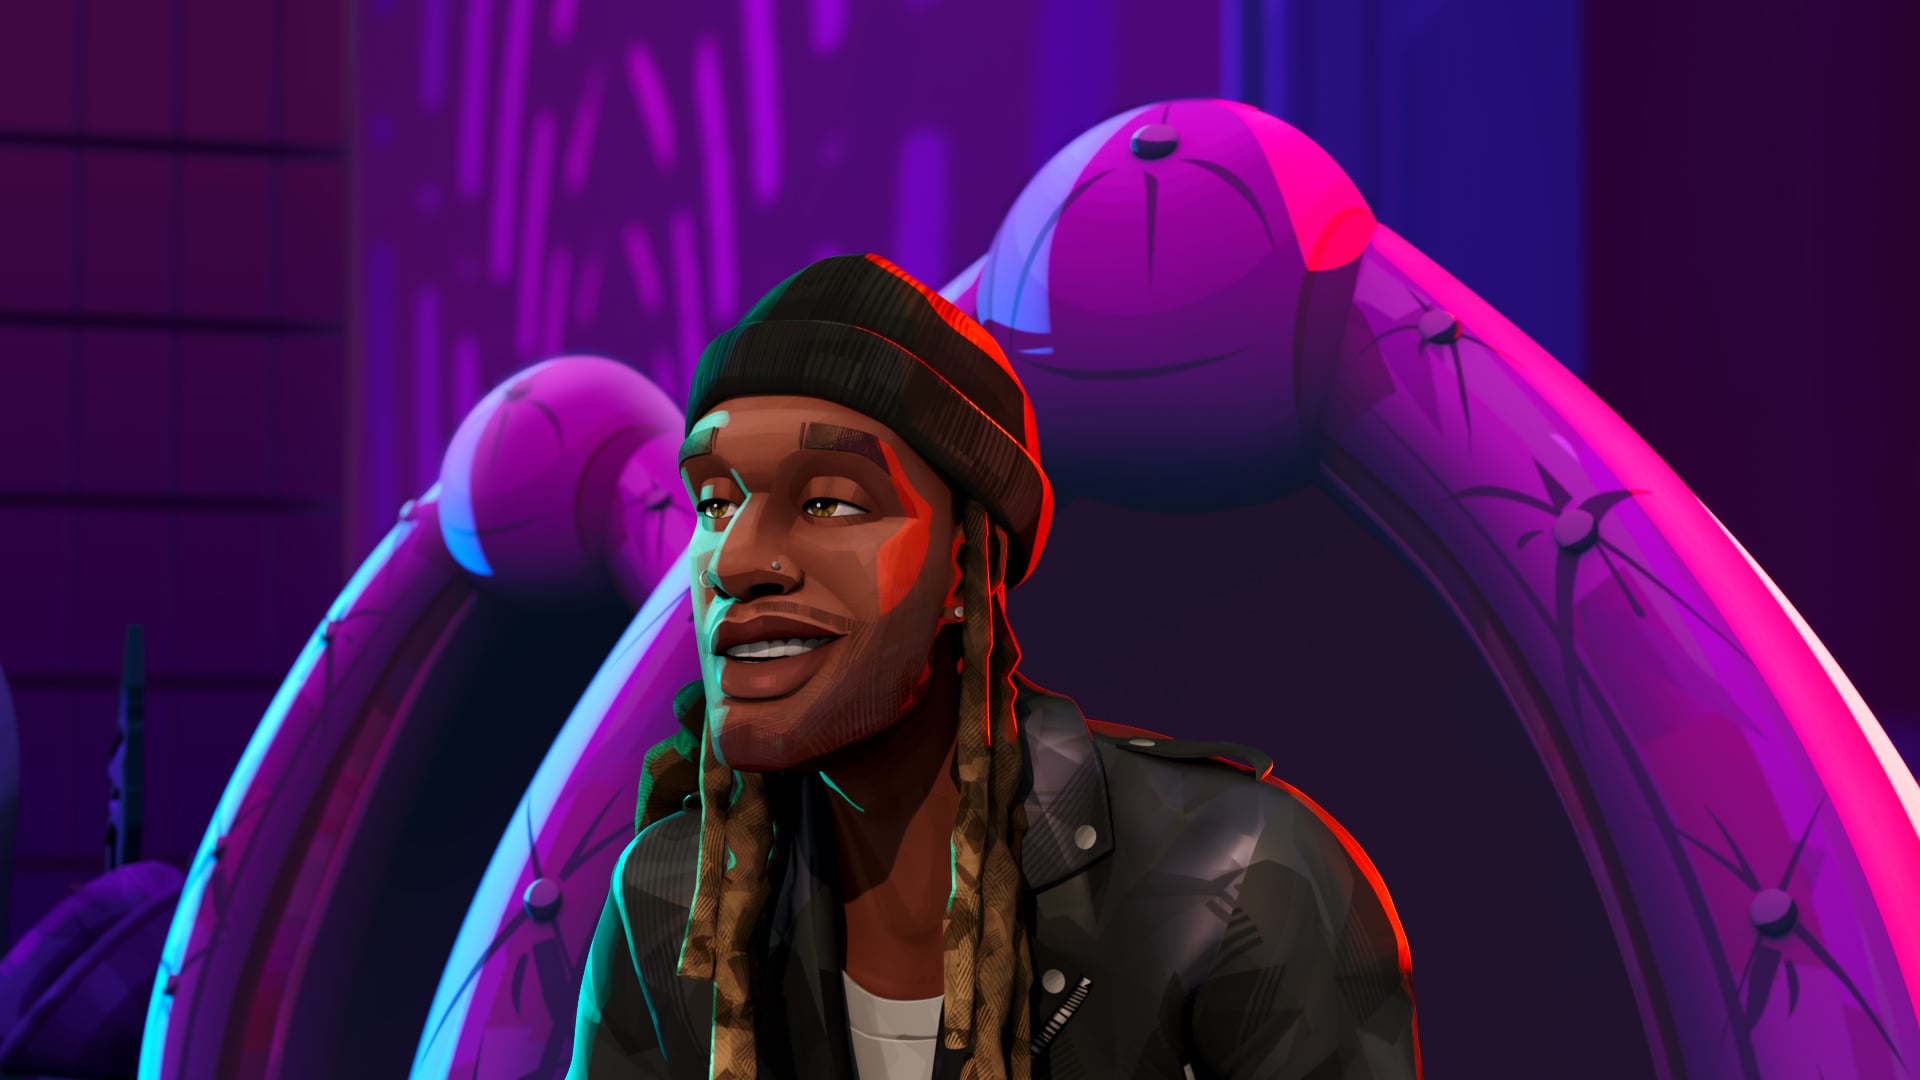 Ty Dolla $ign in Entergalactic. Kid Cudi's Entergalactic Features an Animated Timothée Chalamet, Vanessa Hudgens, and More